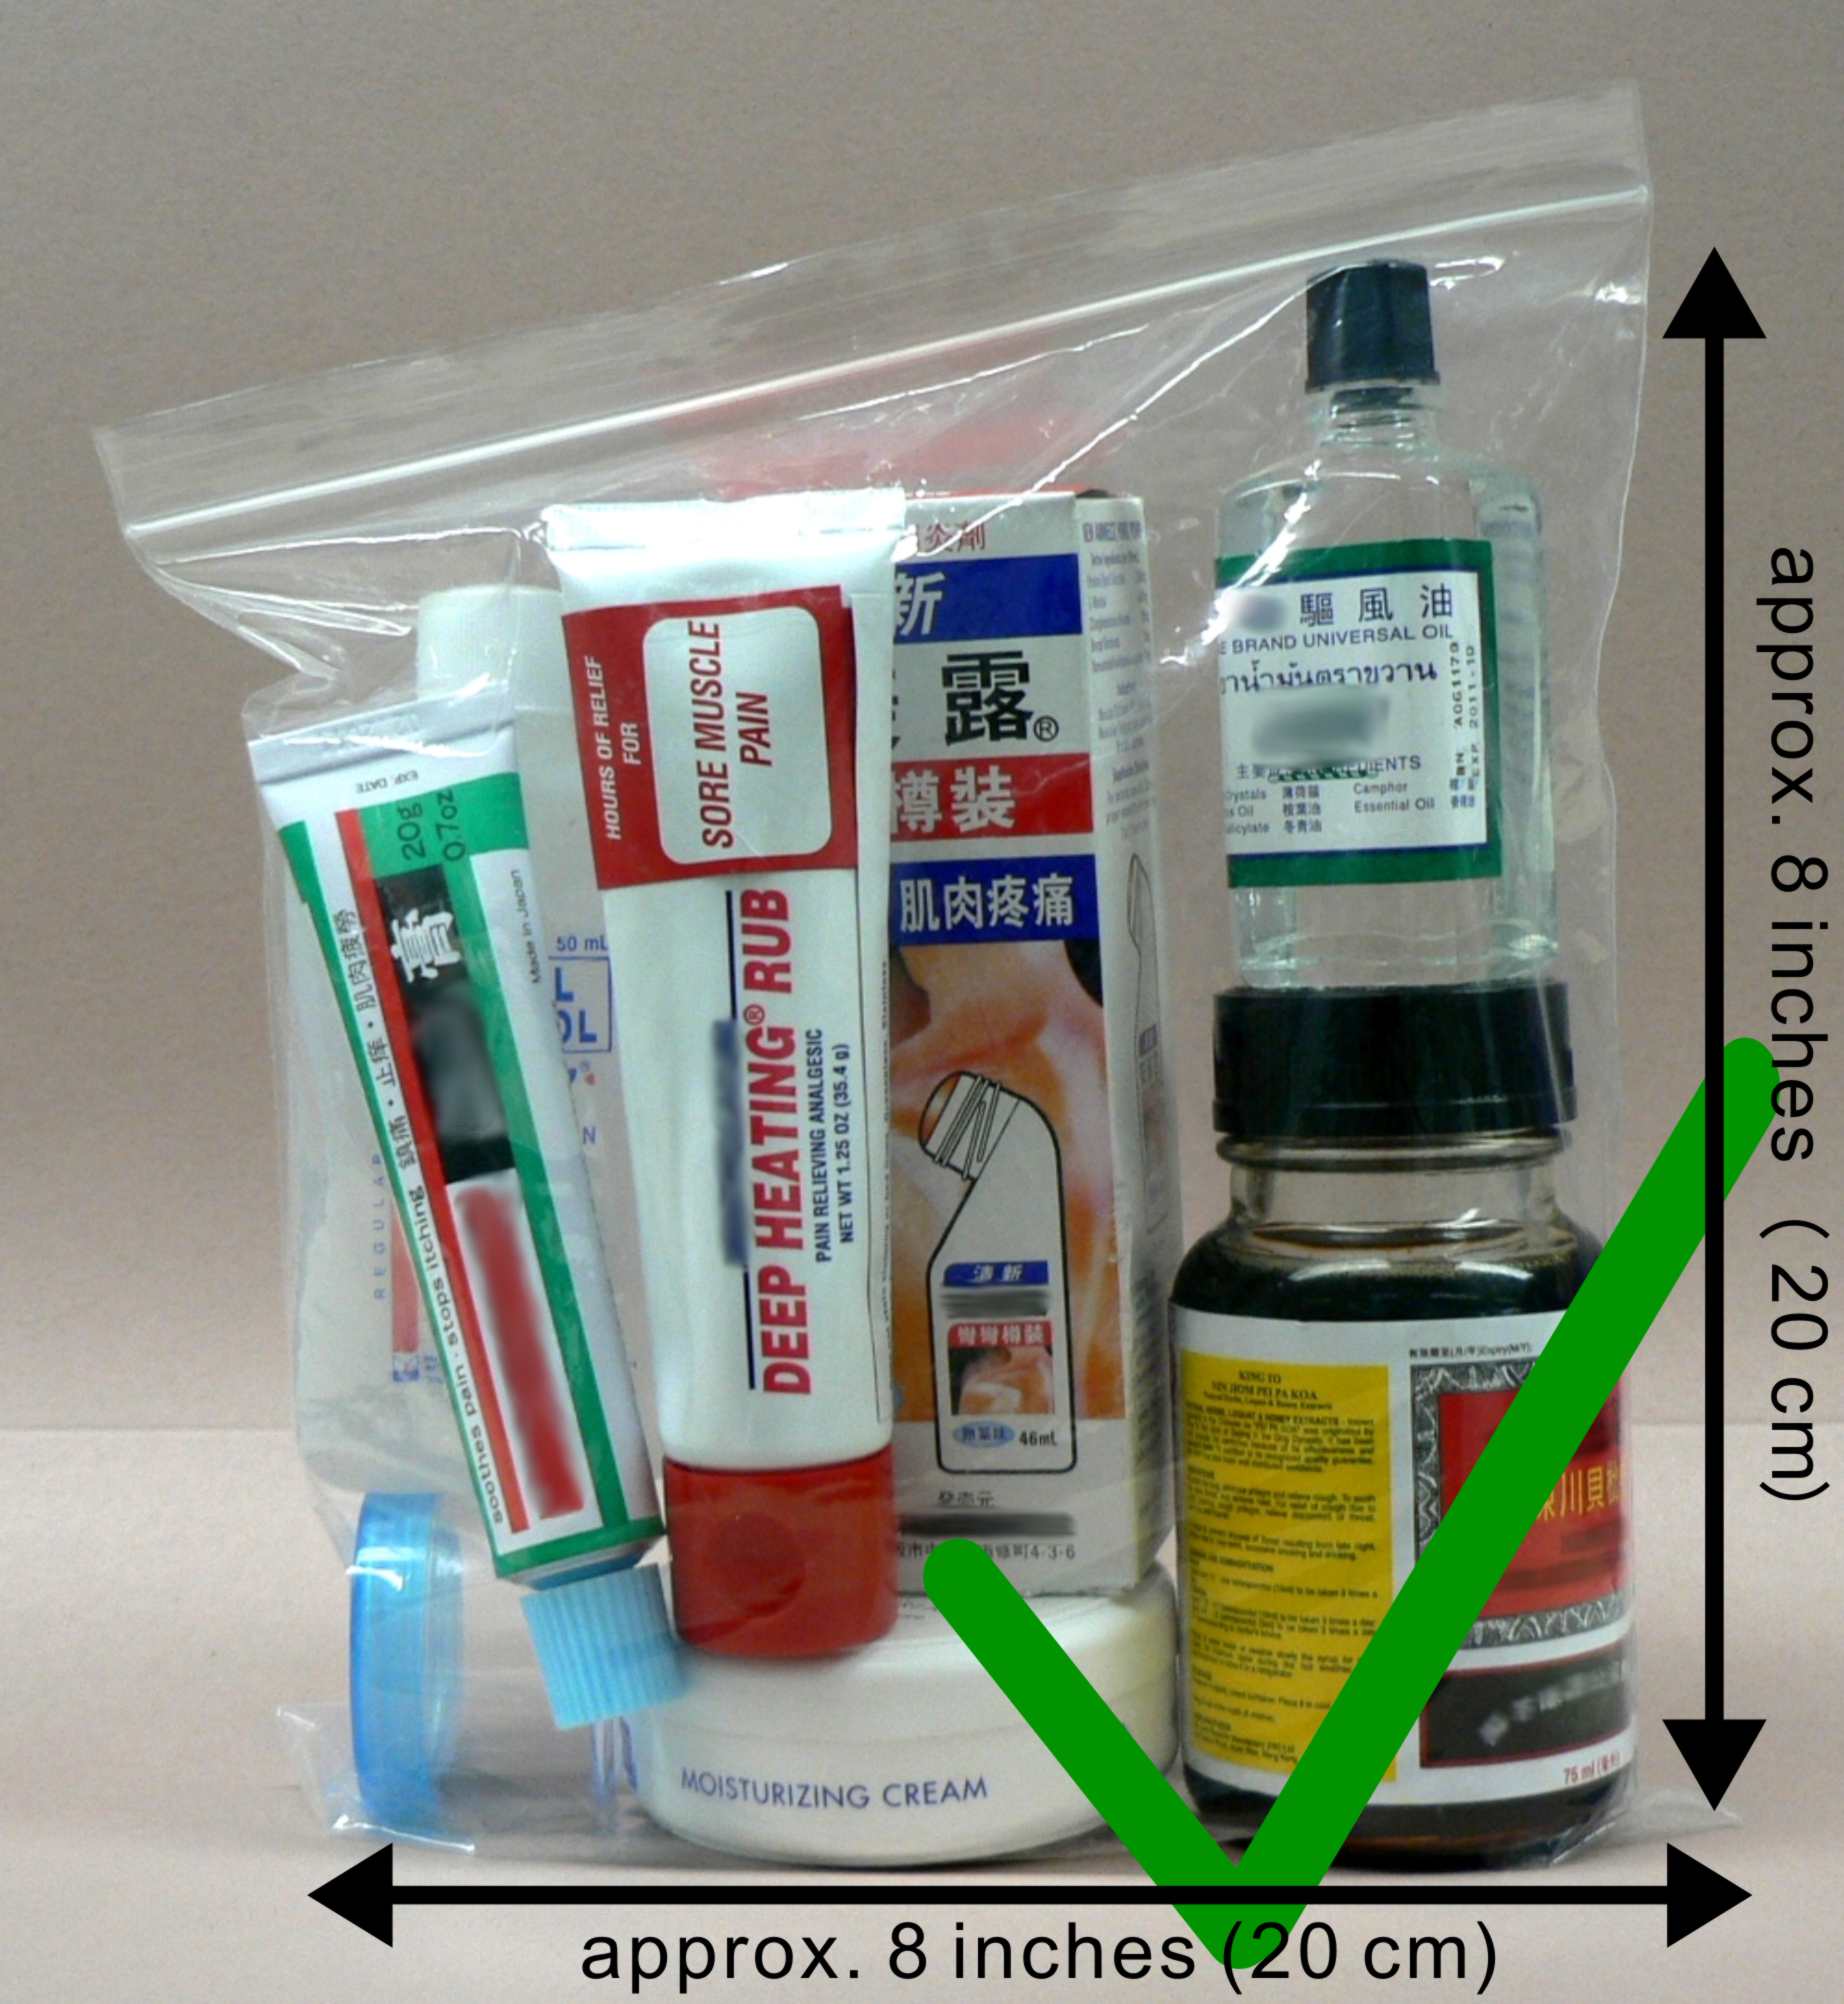 Containers have to be placed in a transparent re-sealable plastic bag of a maximum capacity not exceeding one litre.